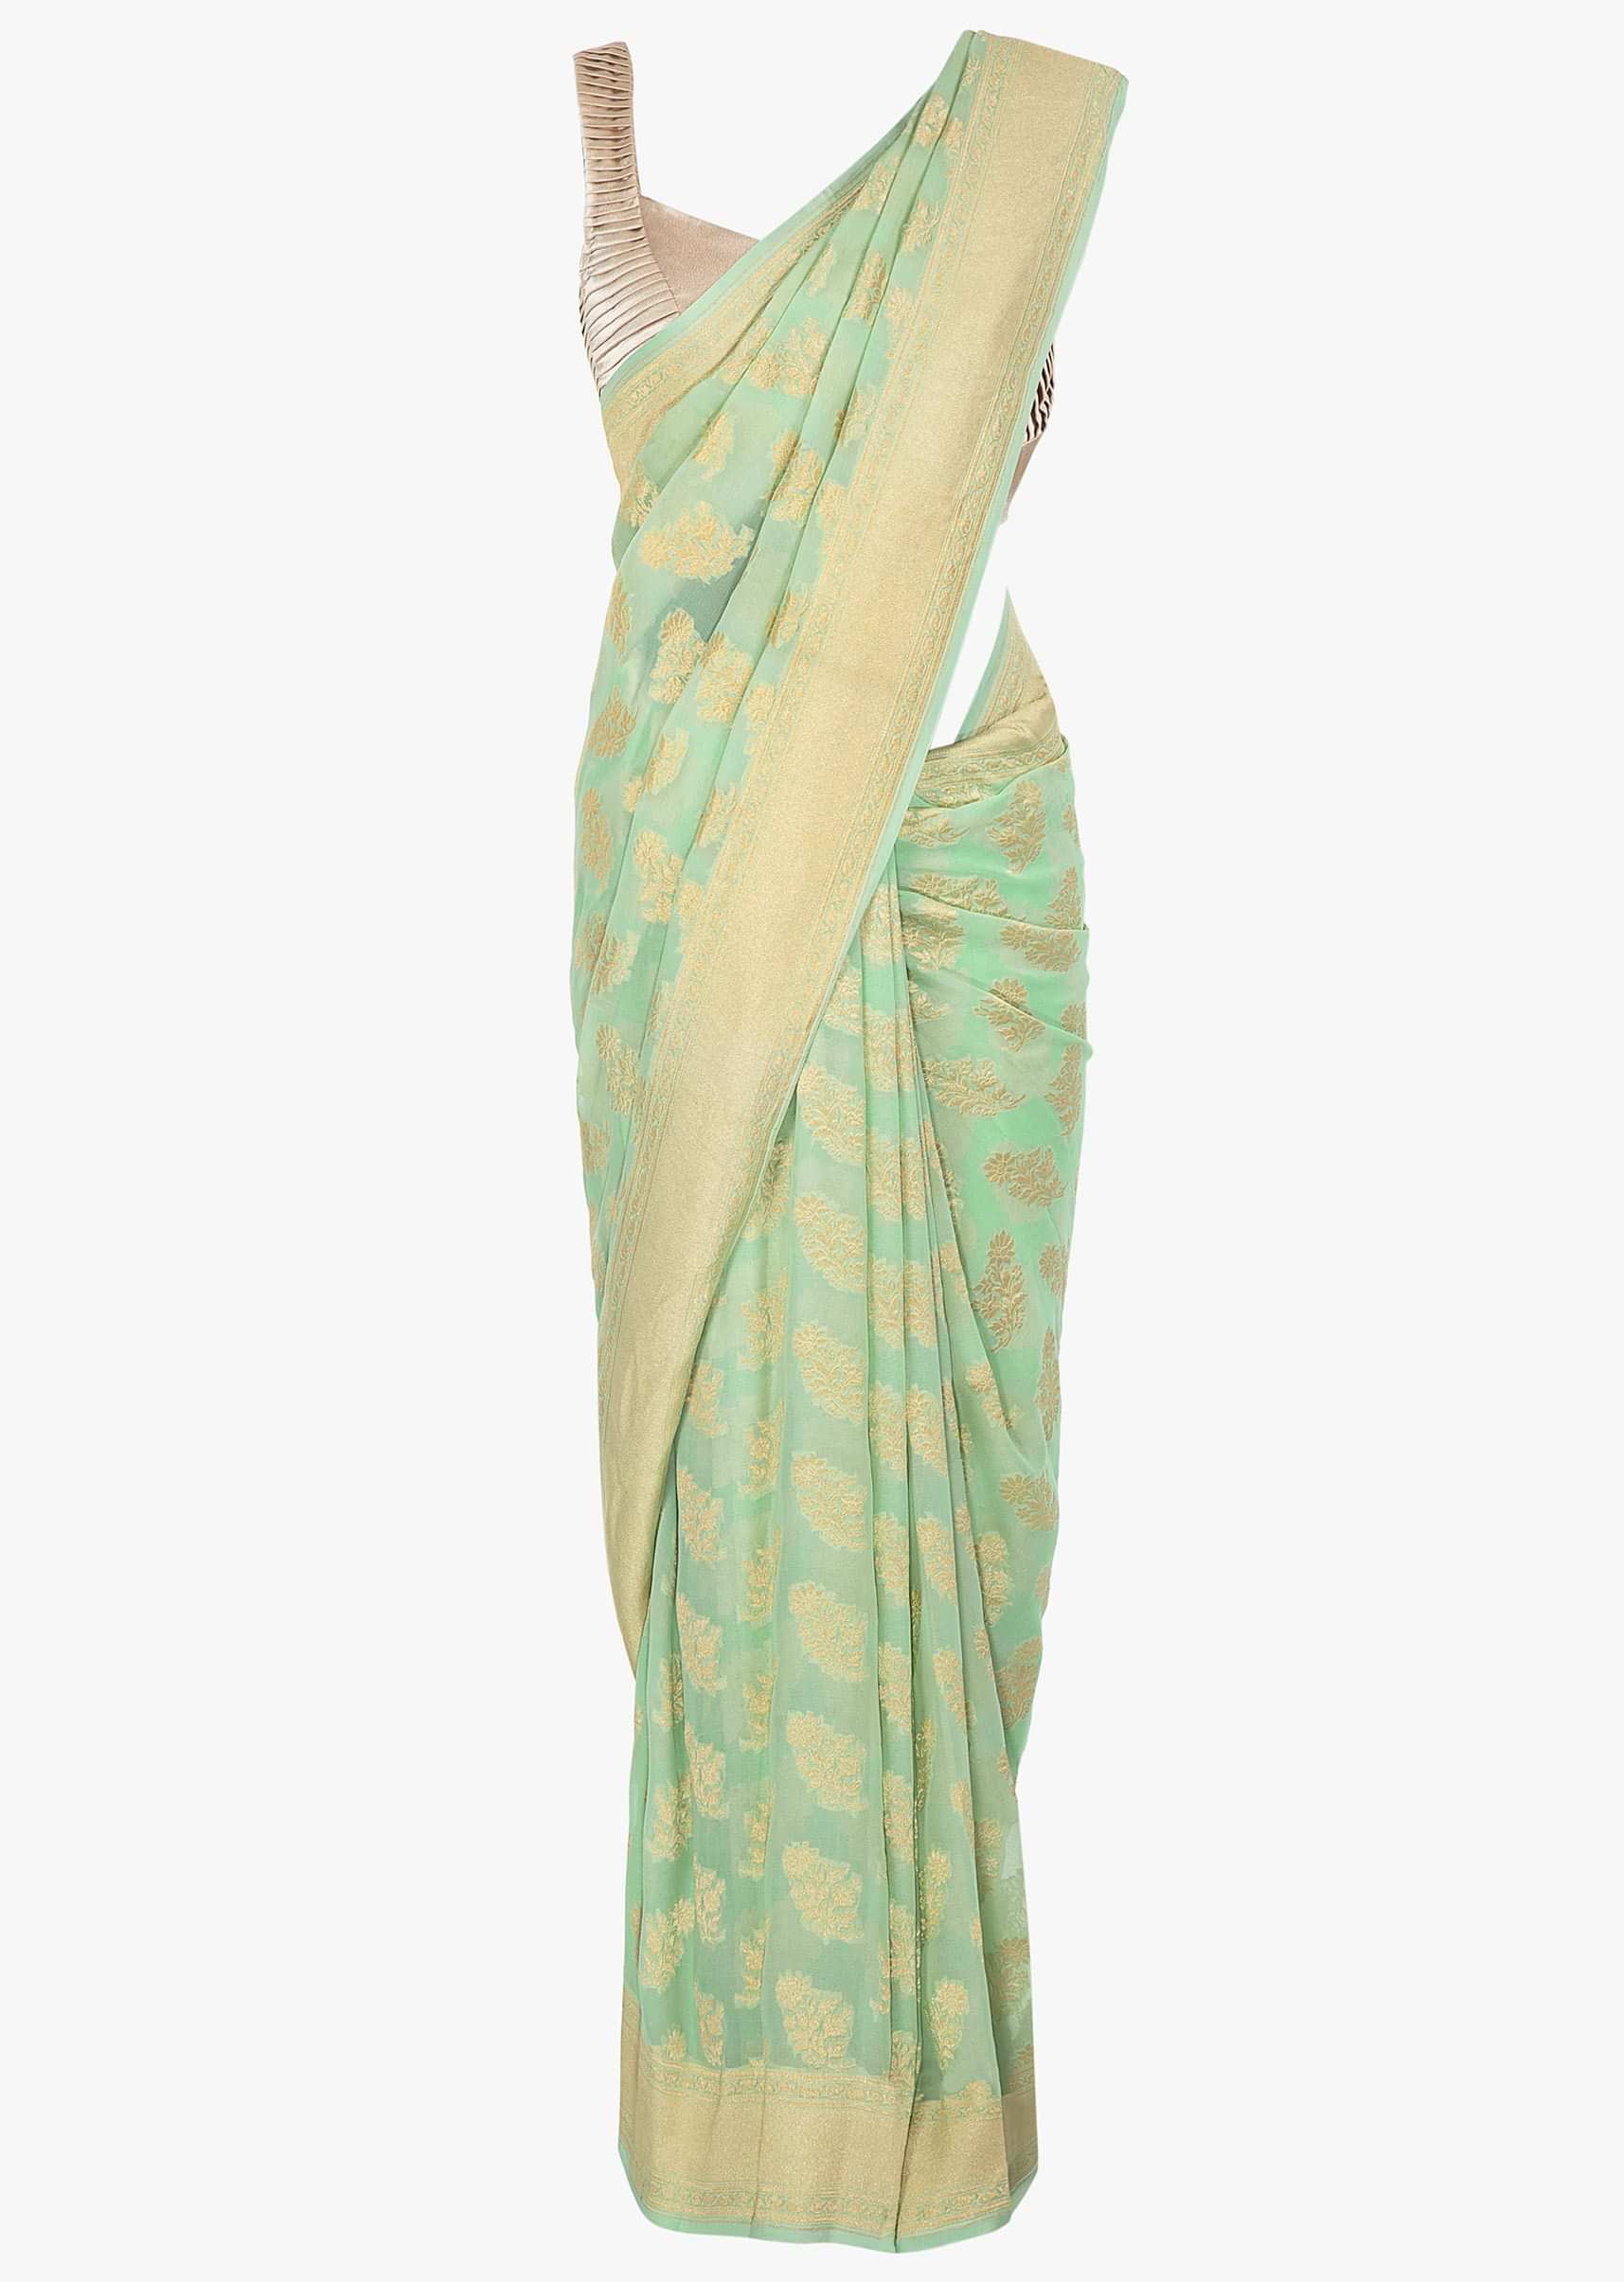 Sea foam green georgette saree in floral weaved butti and border